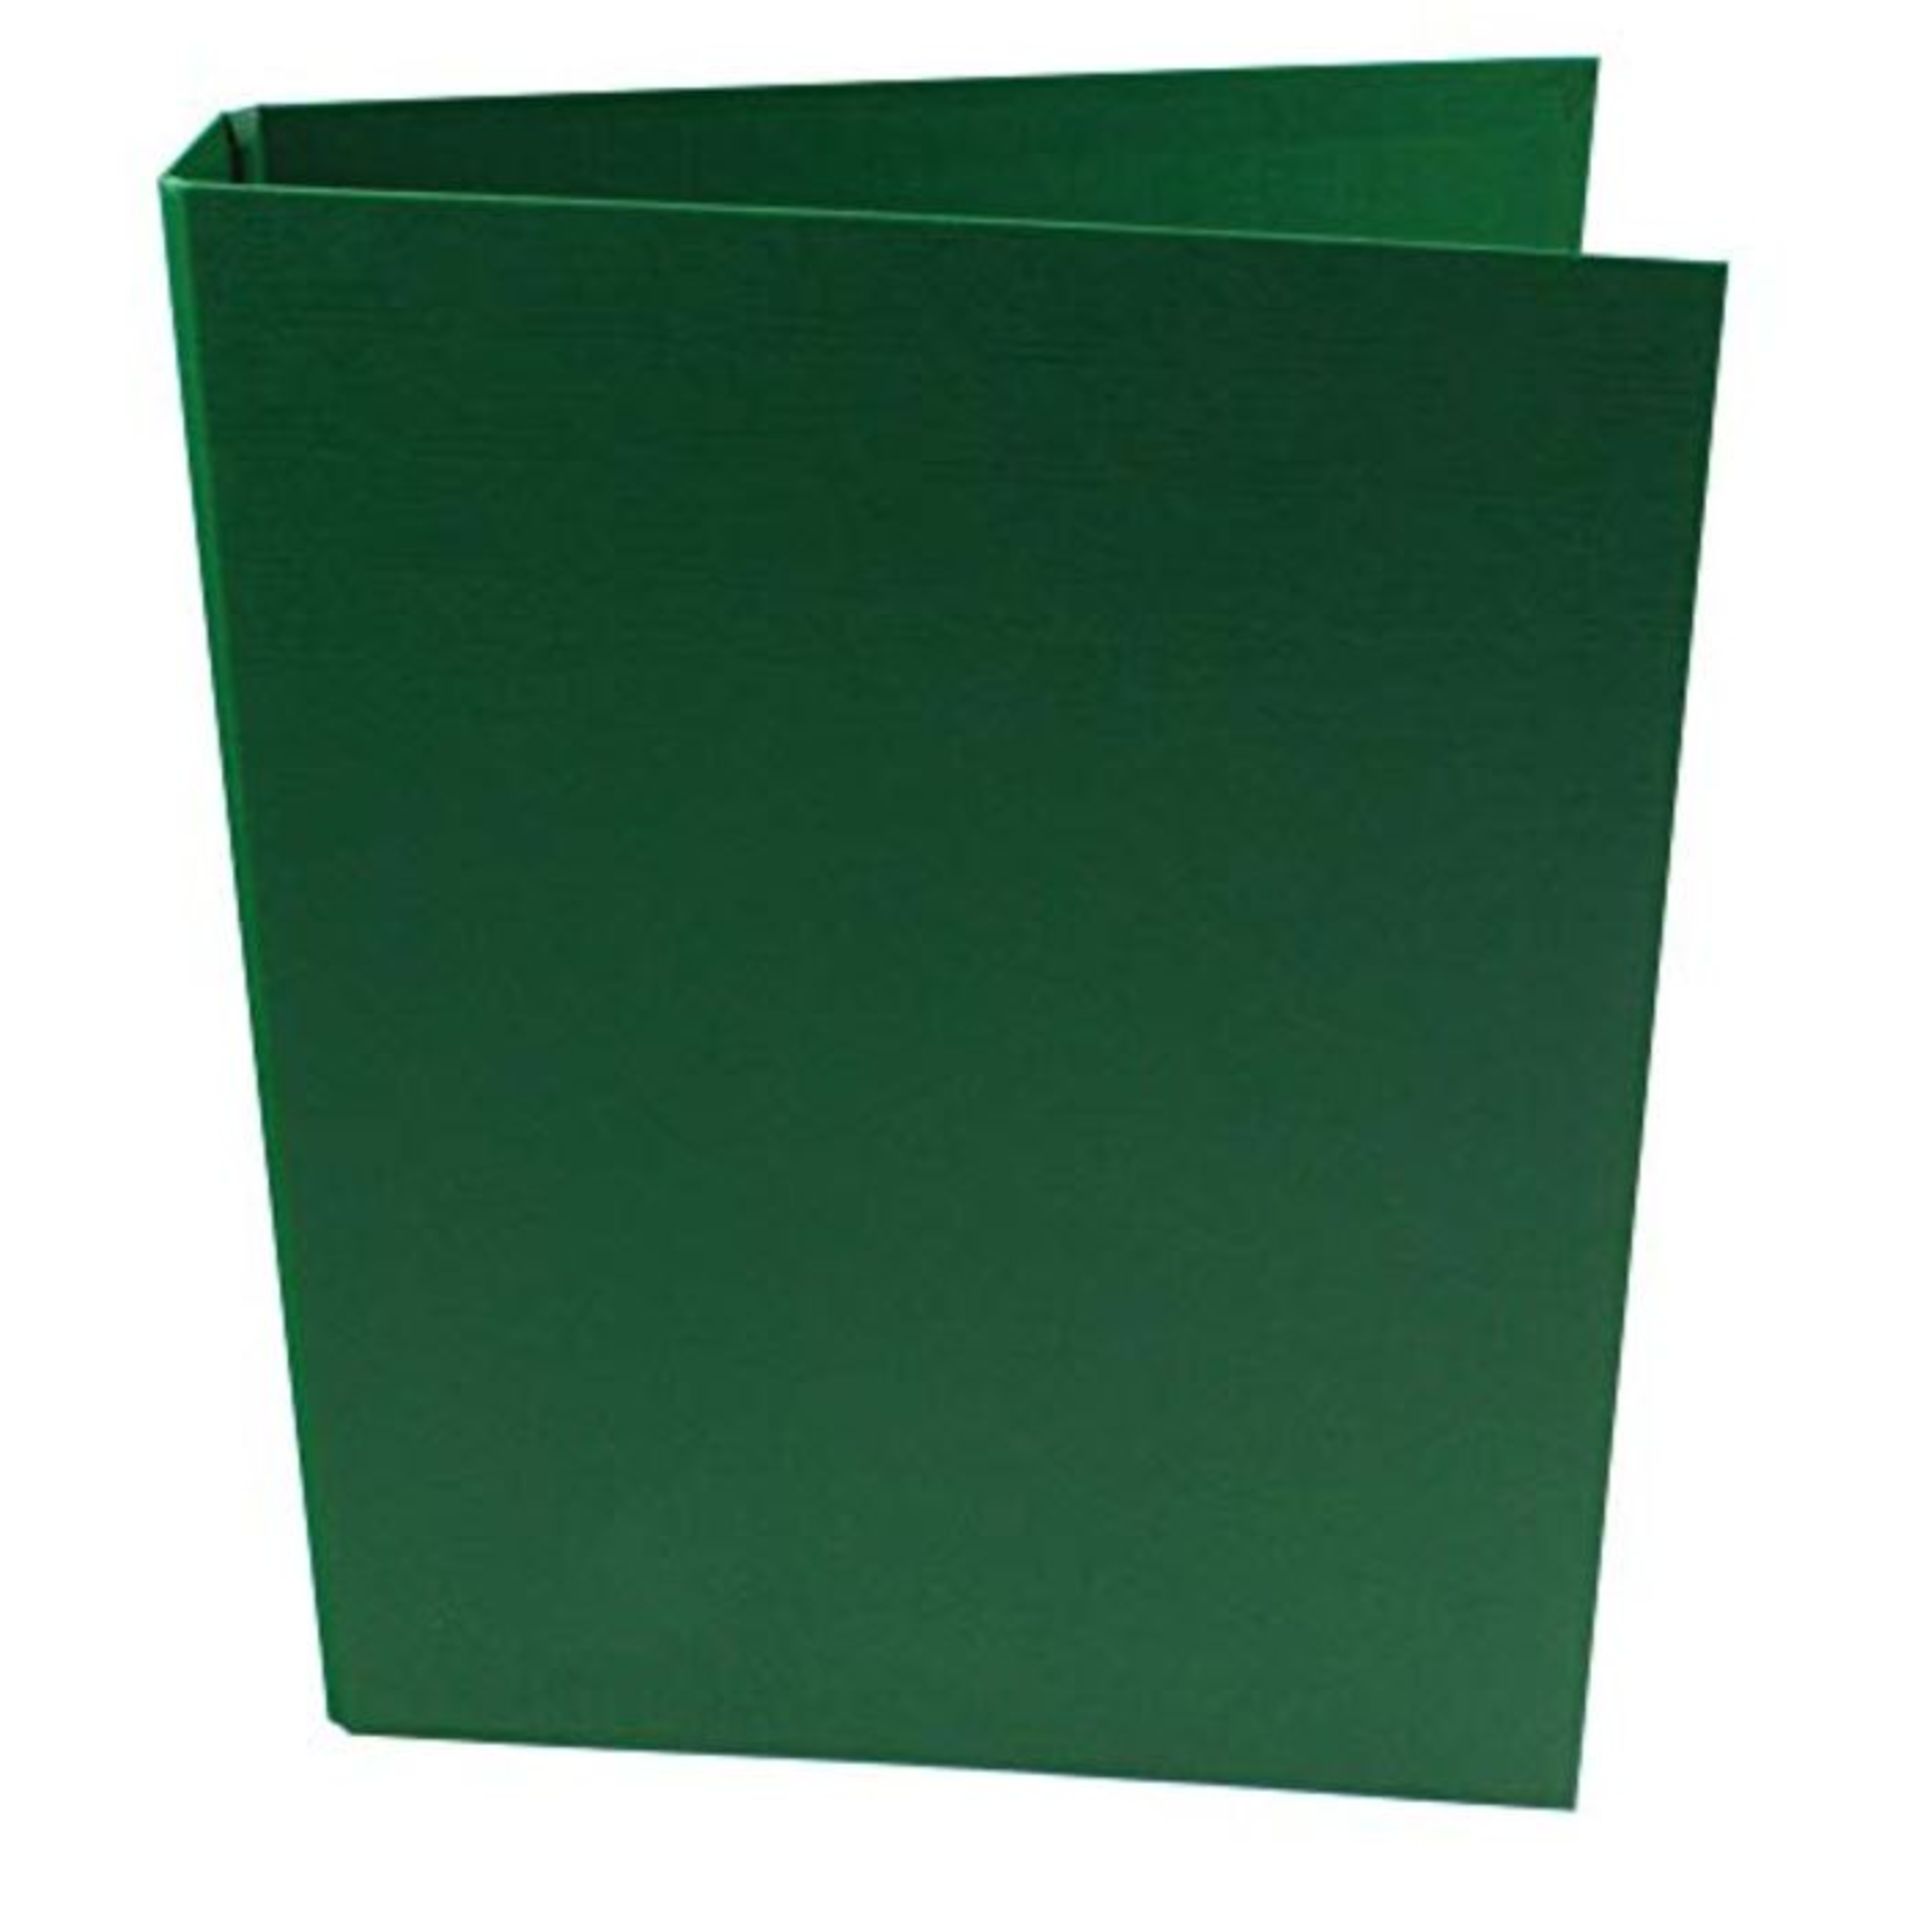 Q-Connect 2 Ring Polypropylene A4 Binder, 25 mm KF02004 - Green, Pack of 10